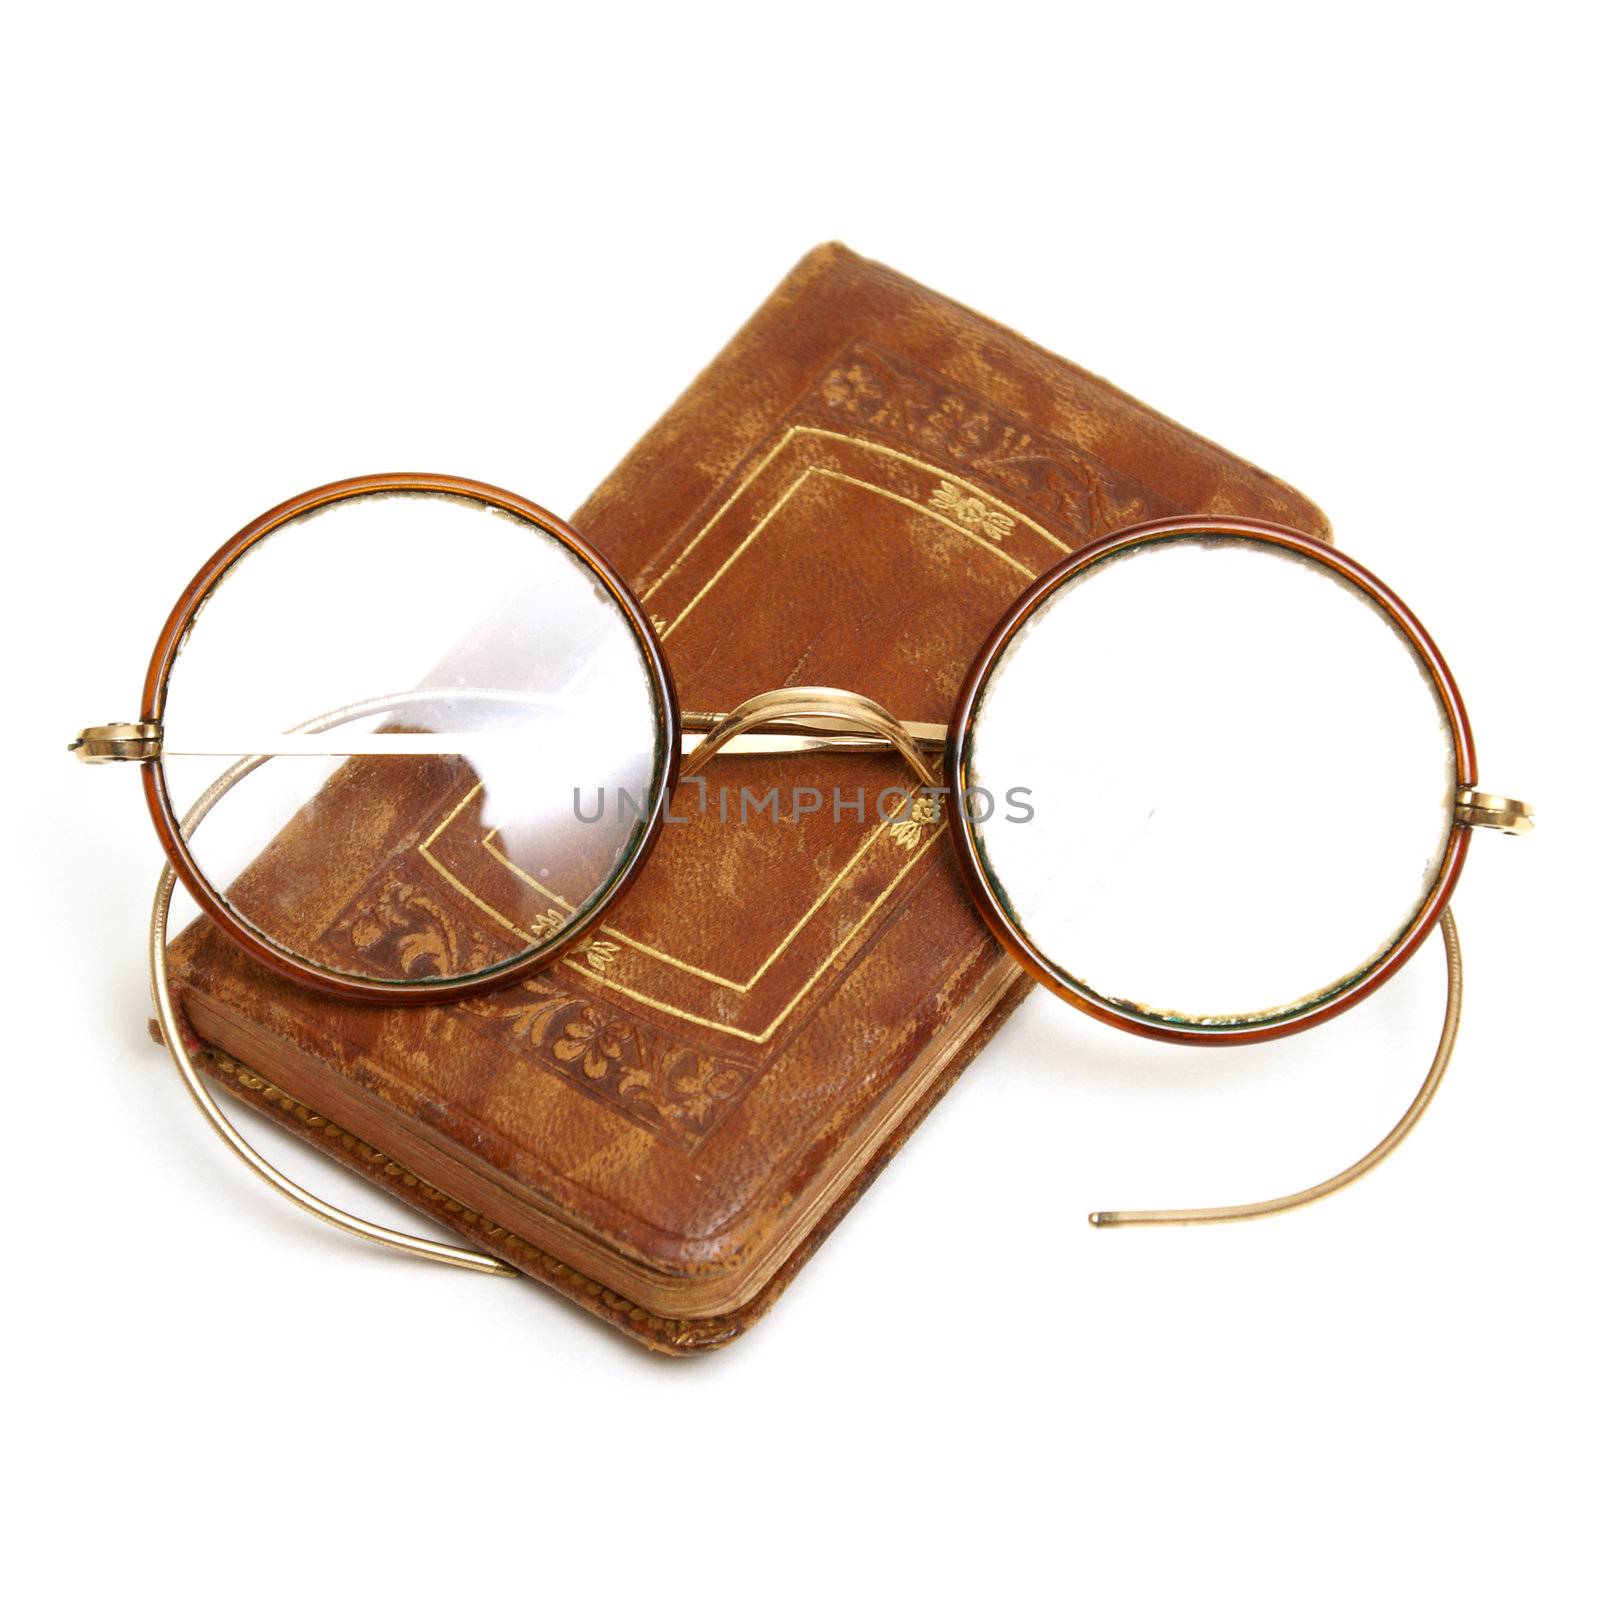 Antique Book and Spectacles by AlphaBaby